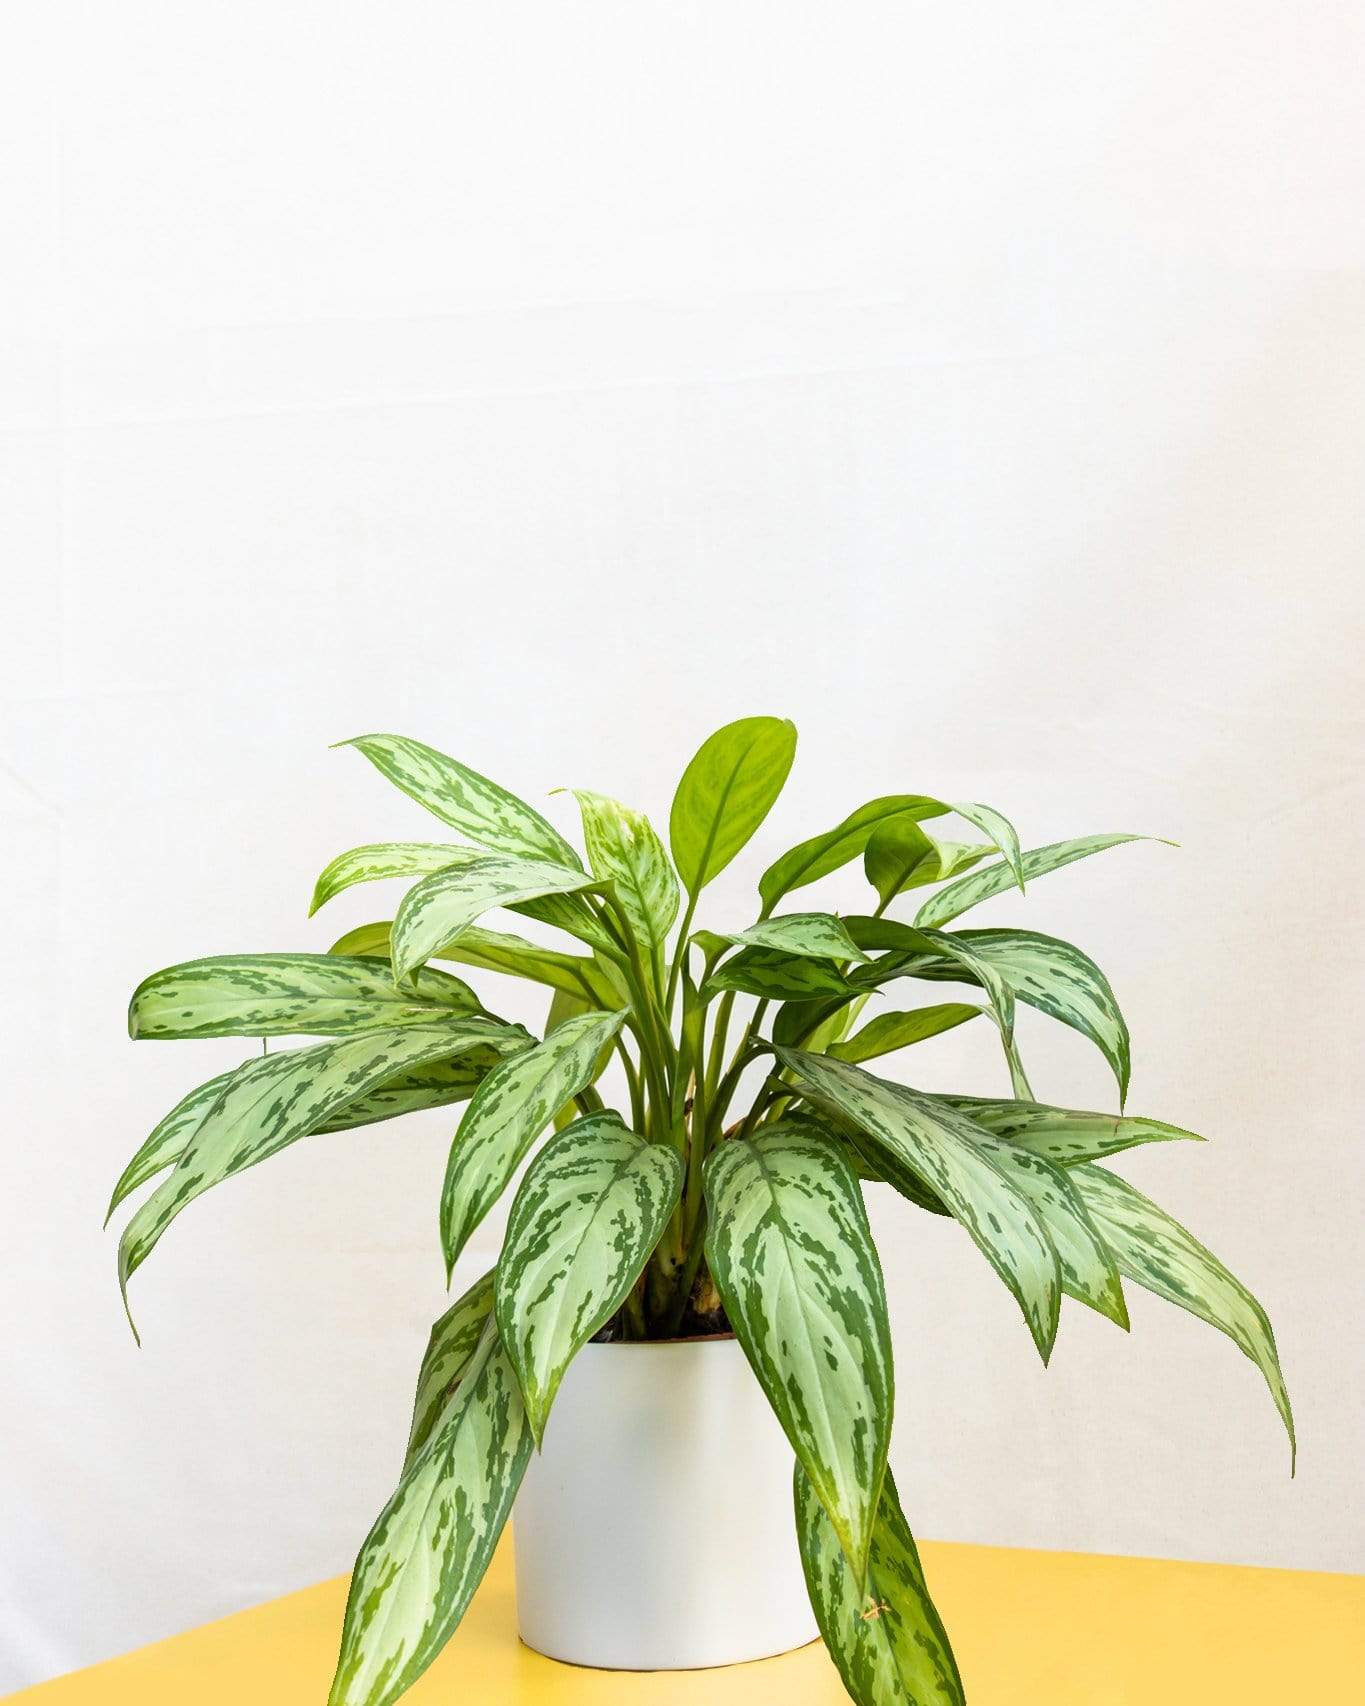 The Chinese Evergreen Home Plant